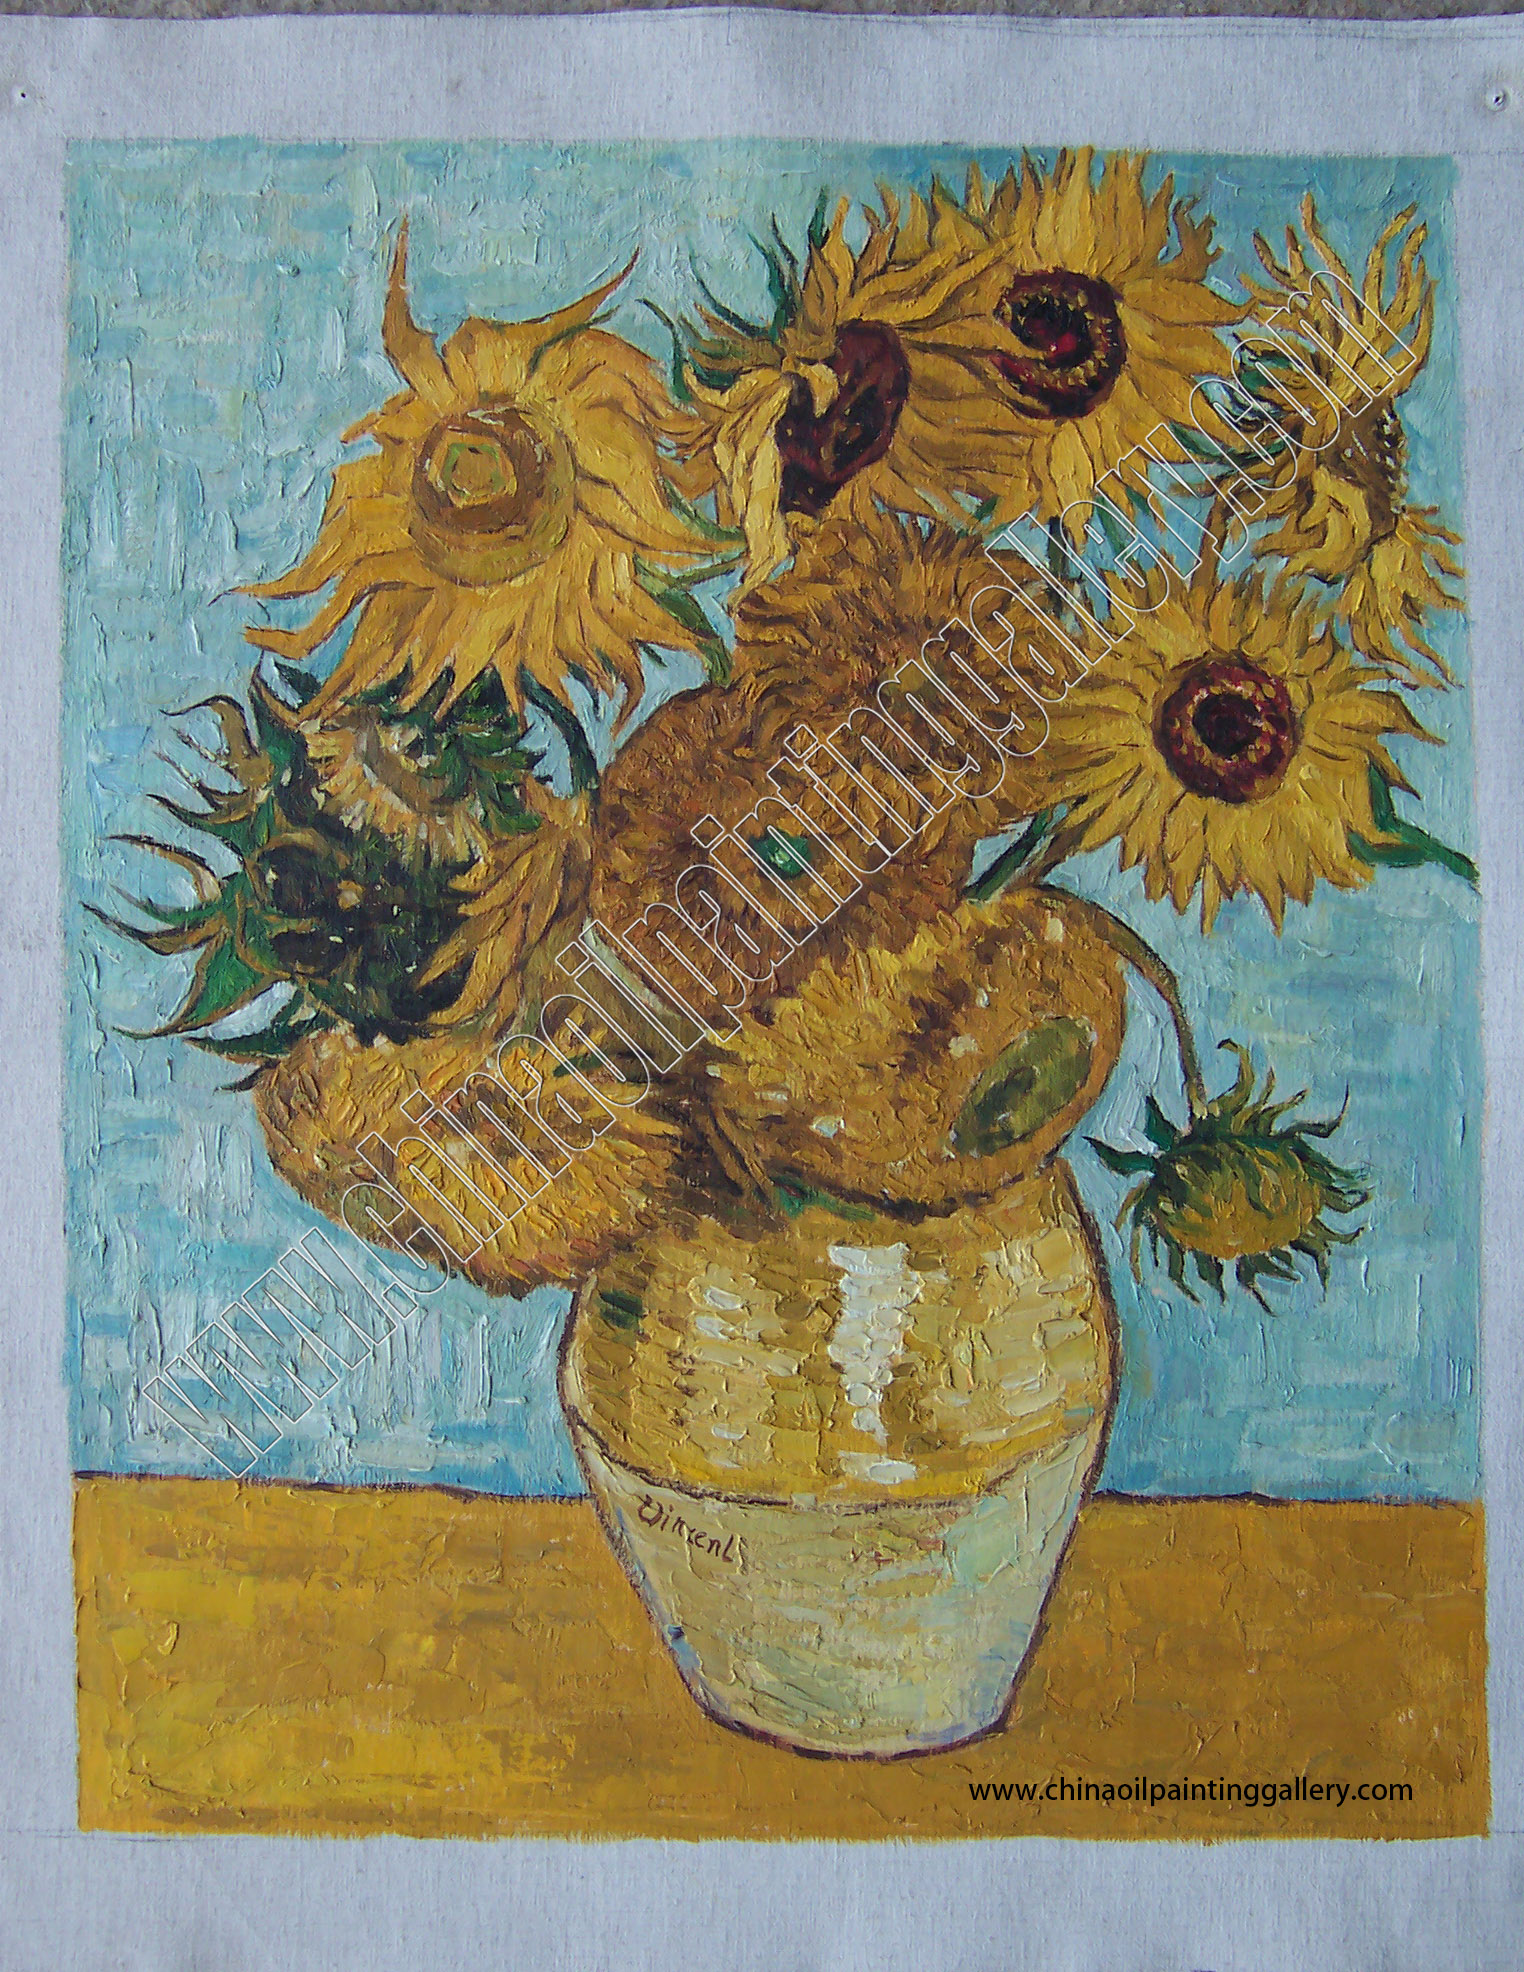 Vincent van Gogh Sunflowers - Oil painting reproductions 18